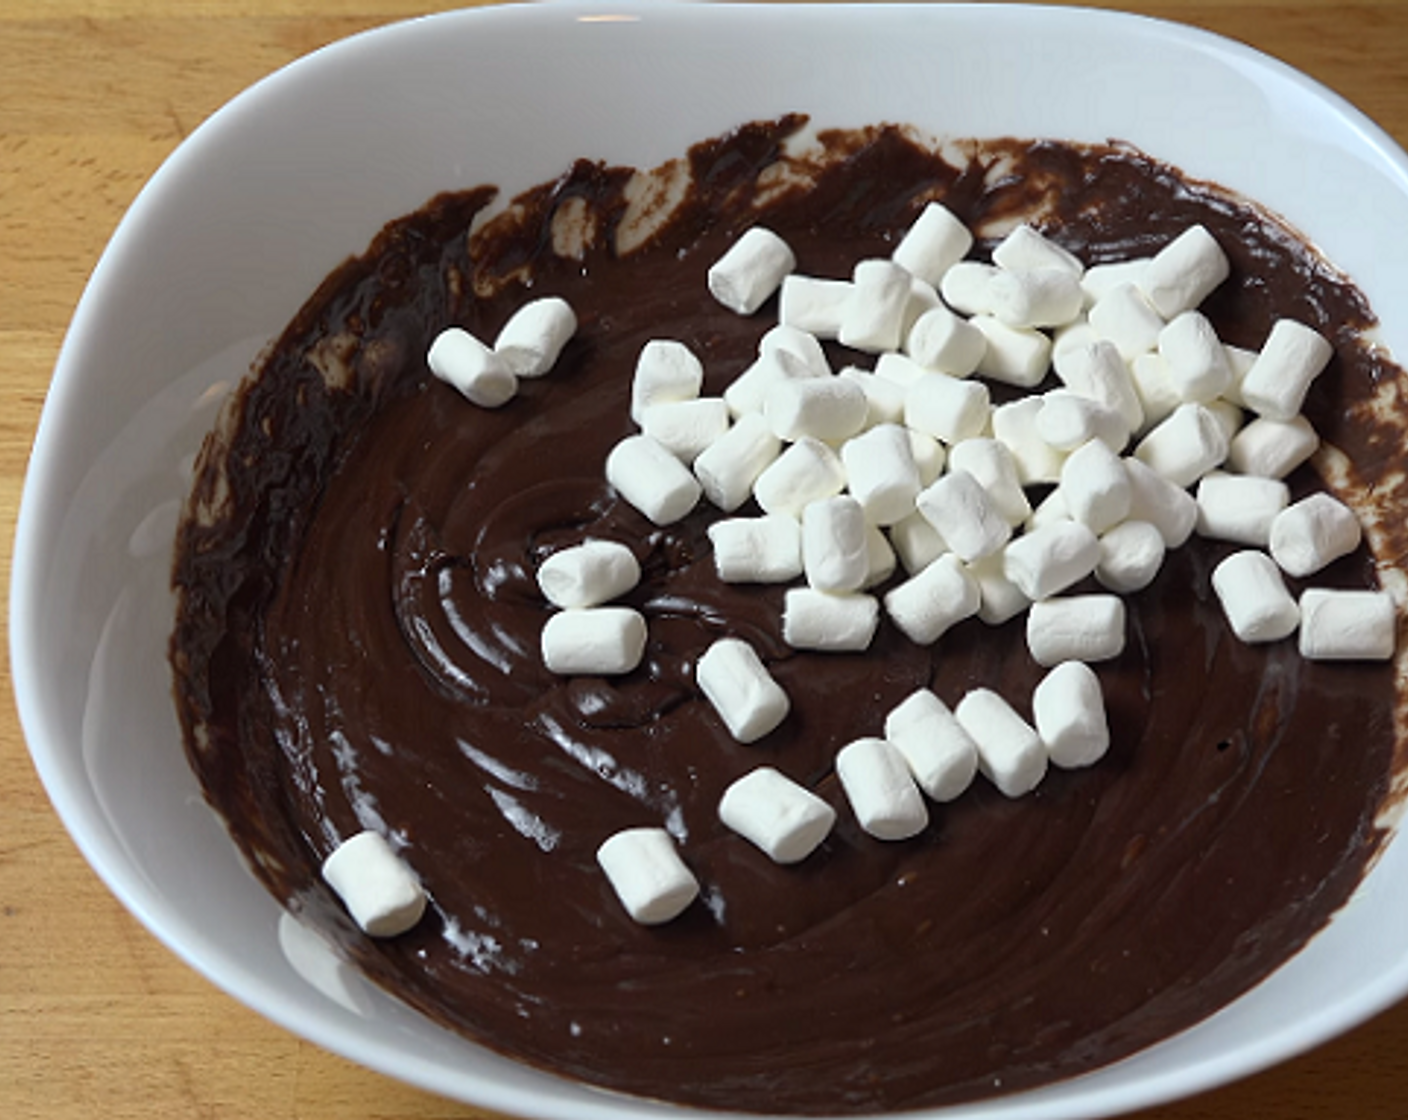 step 3 To the still hot chocolate, stir in the Mini Marshmallows (1/2 cup) until completely melted and combined.